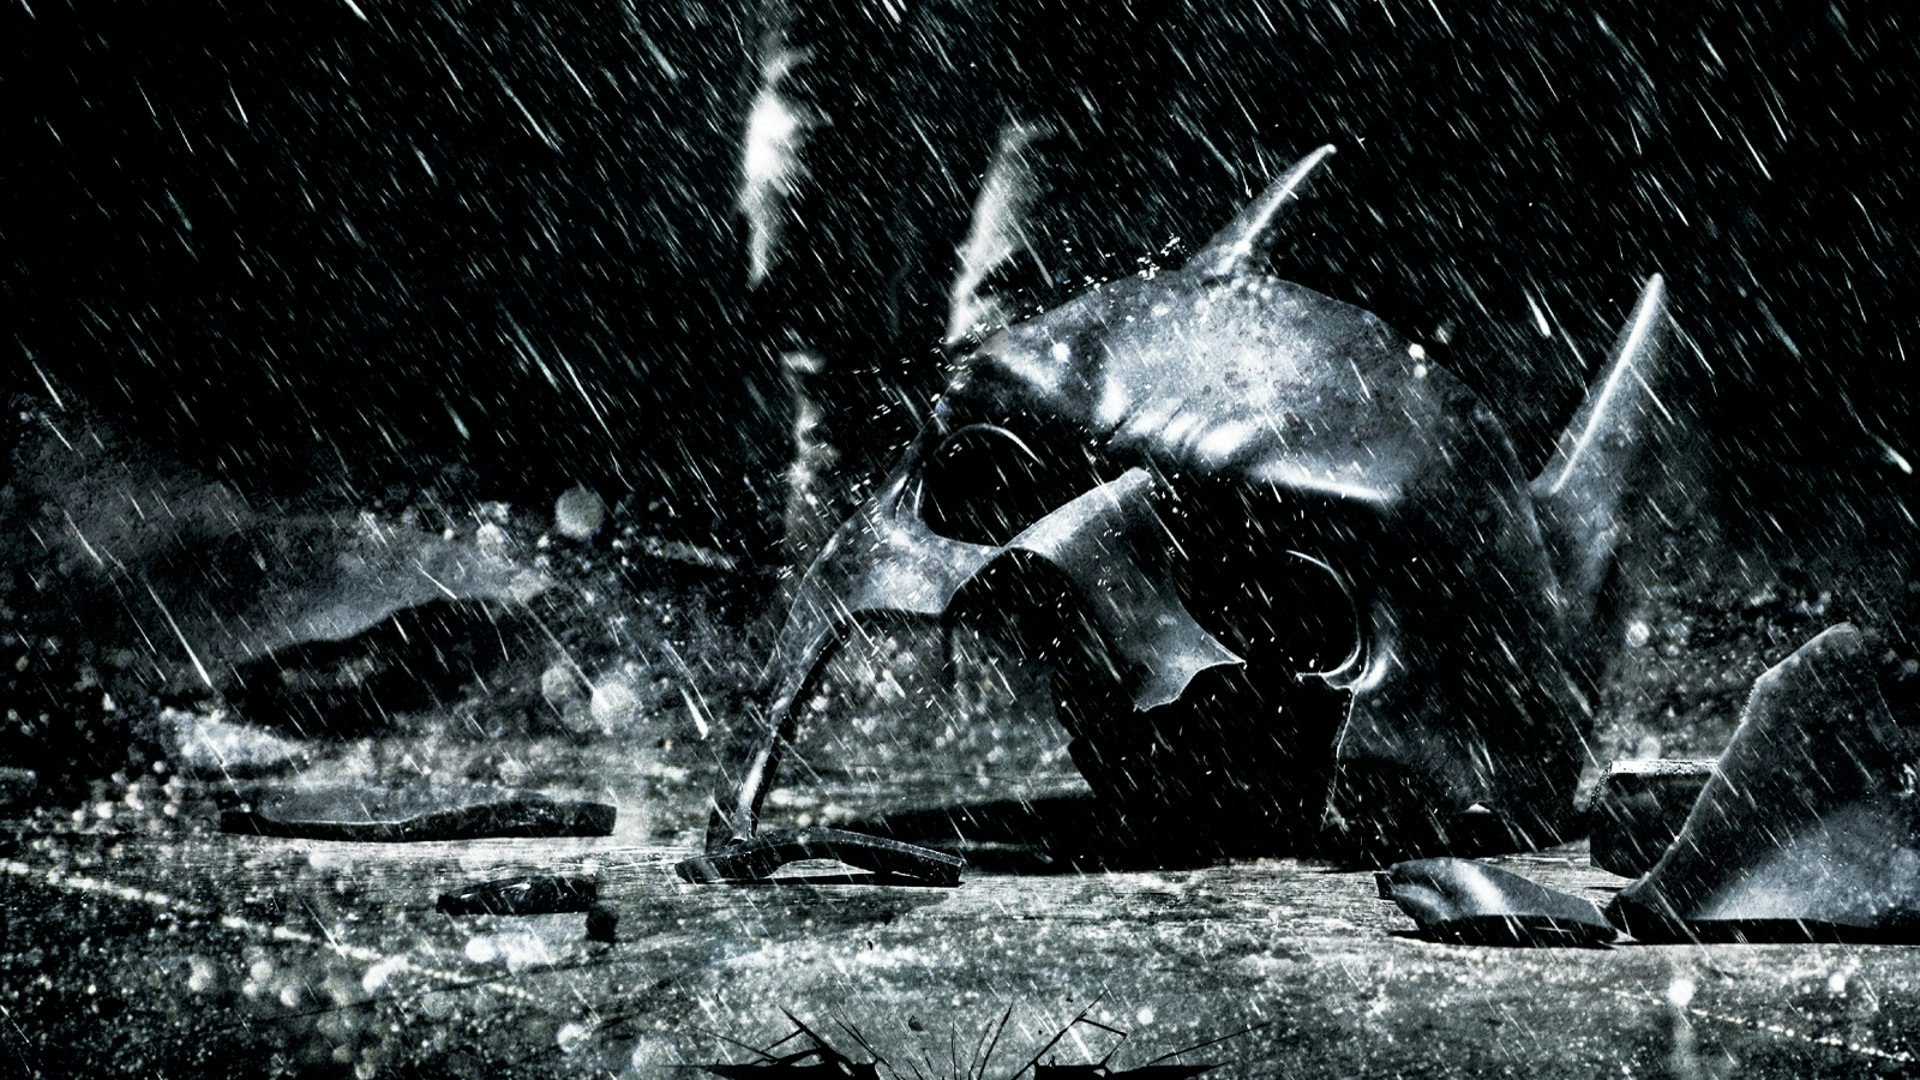 Review: 'The Dark Knight Rises,' With Christian Bale - The New